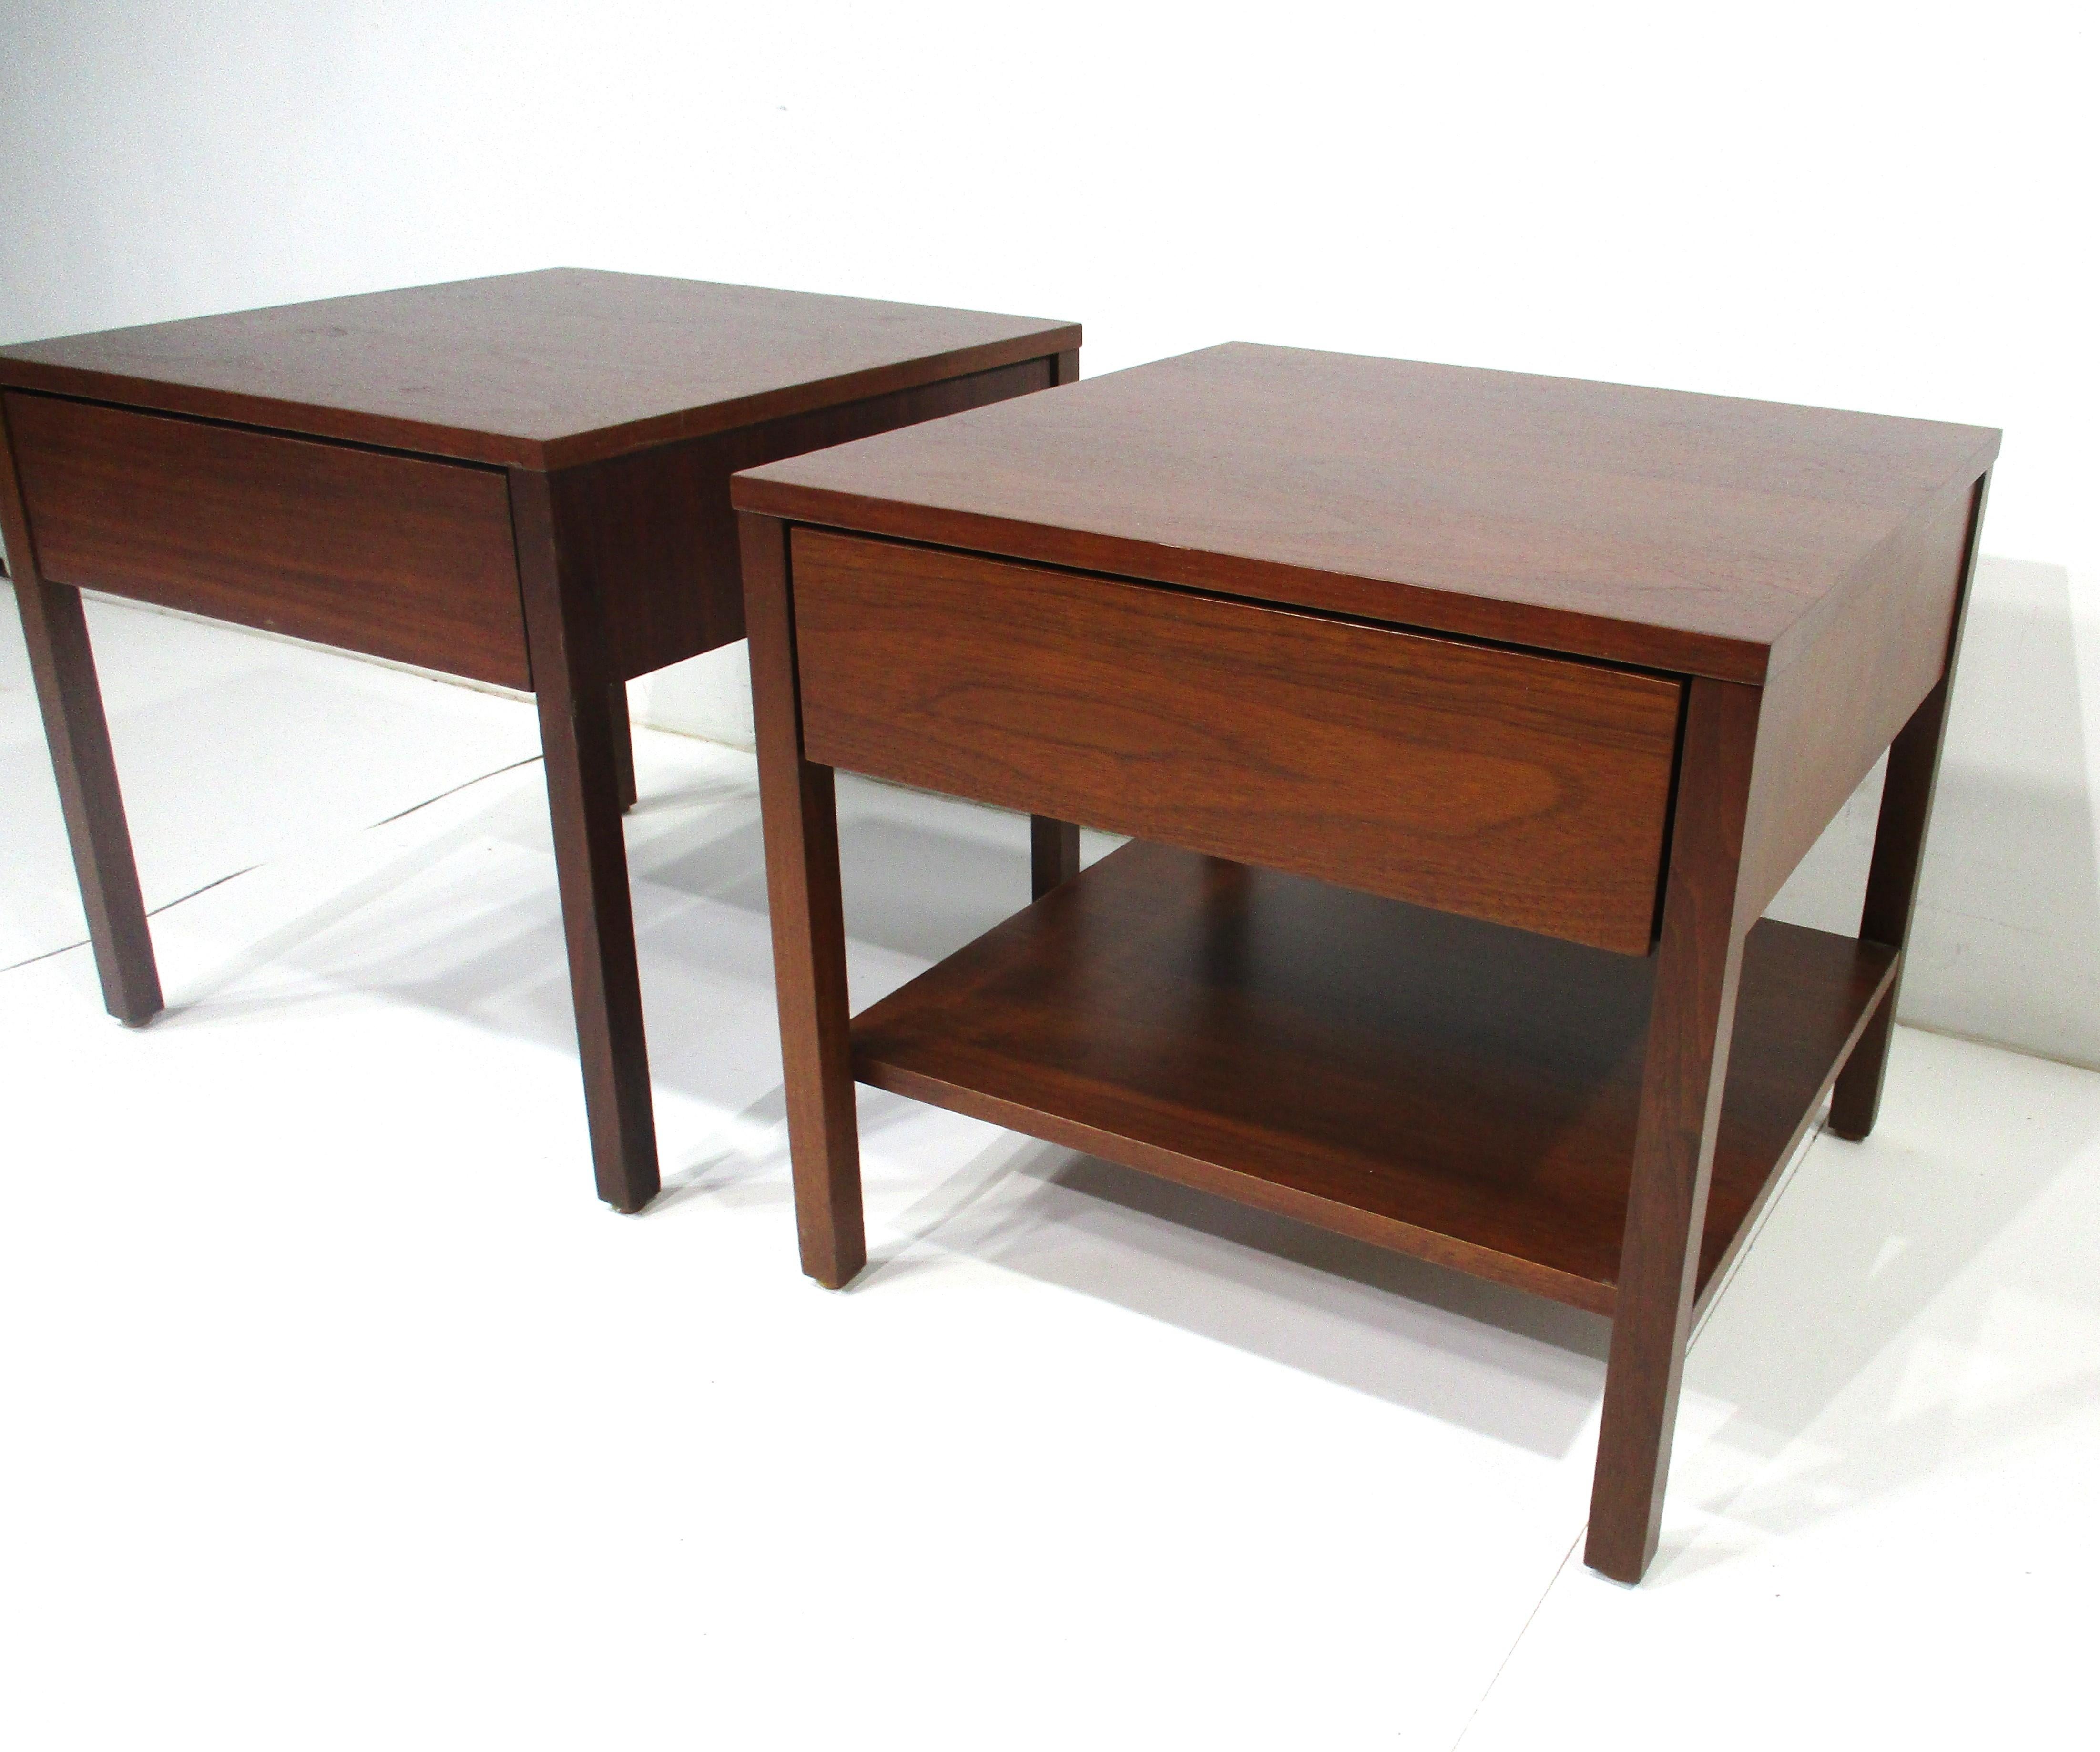 A pair of dark walnut nightstands each having a single drawer and one with a lower shelve . This very well crafted pair of nightstands with a simple but elegant form stays true to the female designers style . Florence Knoll who was head designer and